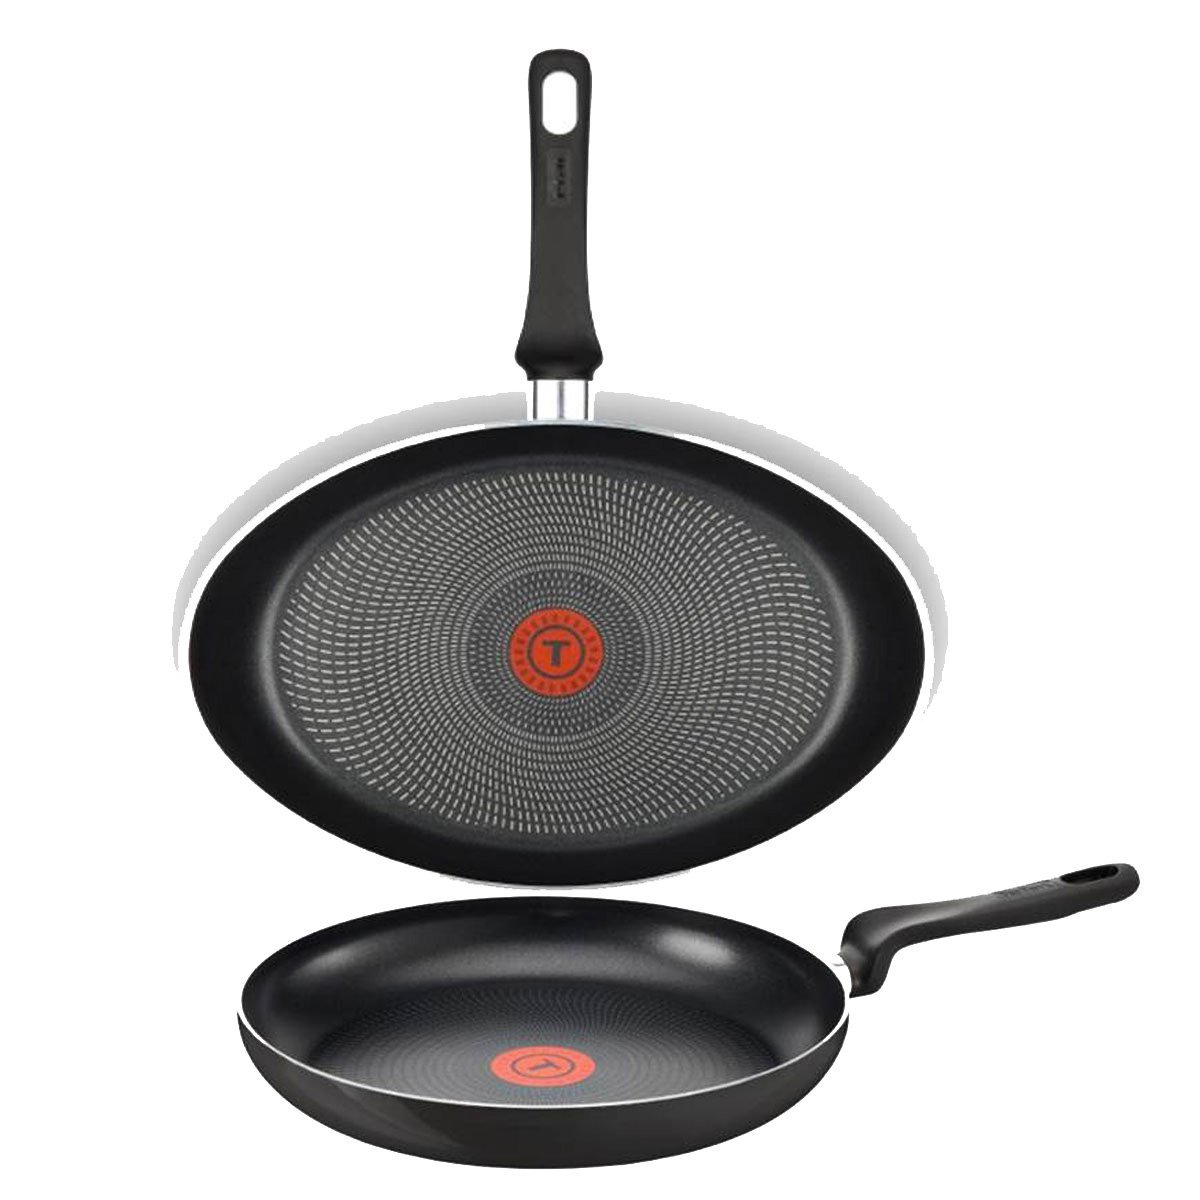 Juego Fishpan 36 y Sart&eacute;n 24 Cook Right Negro T-Fal